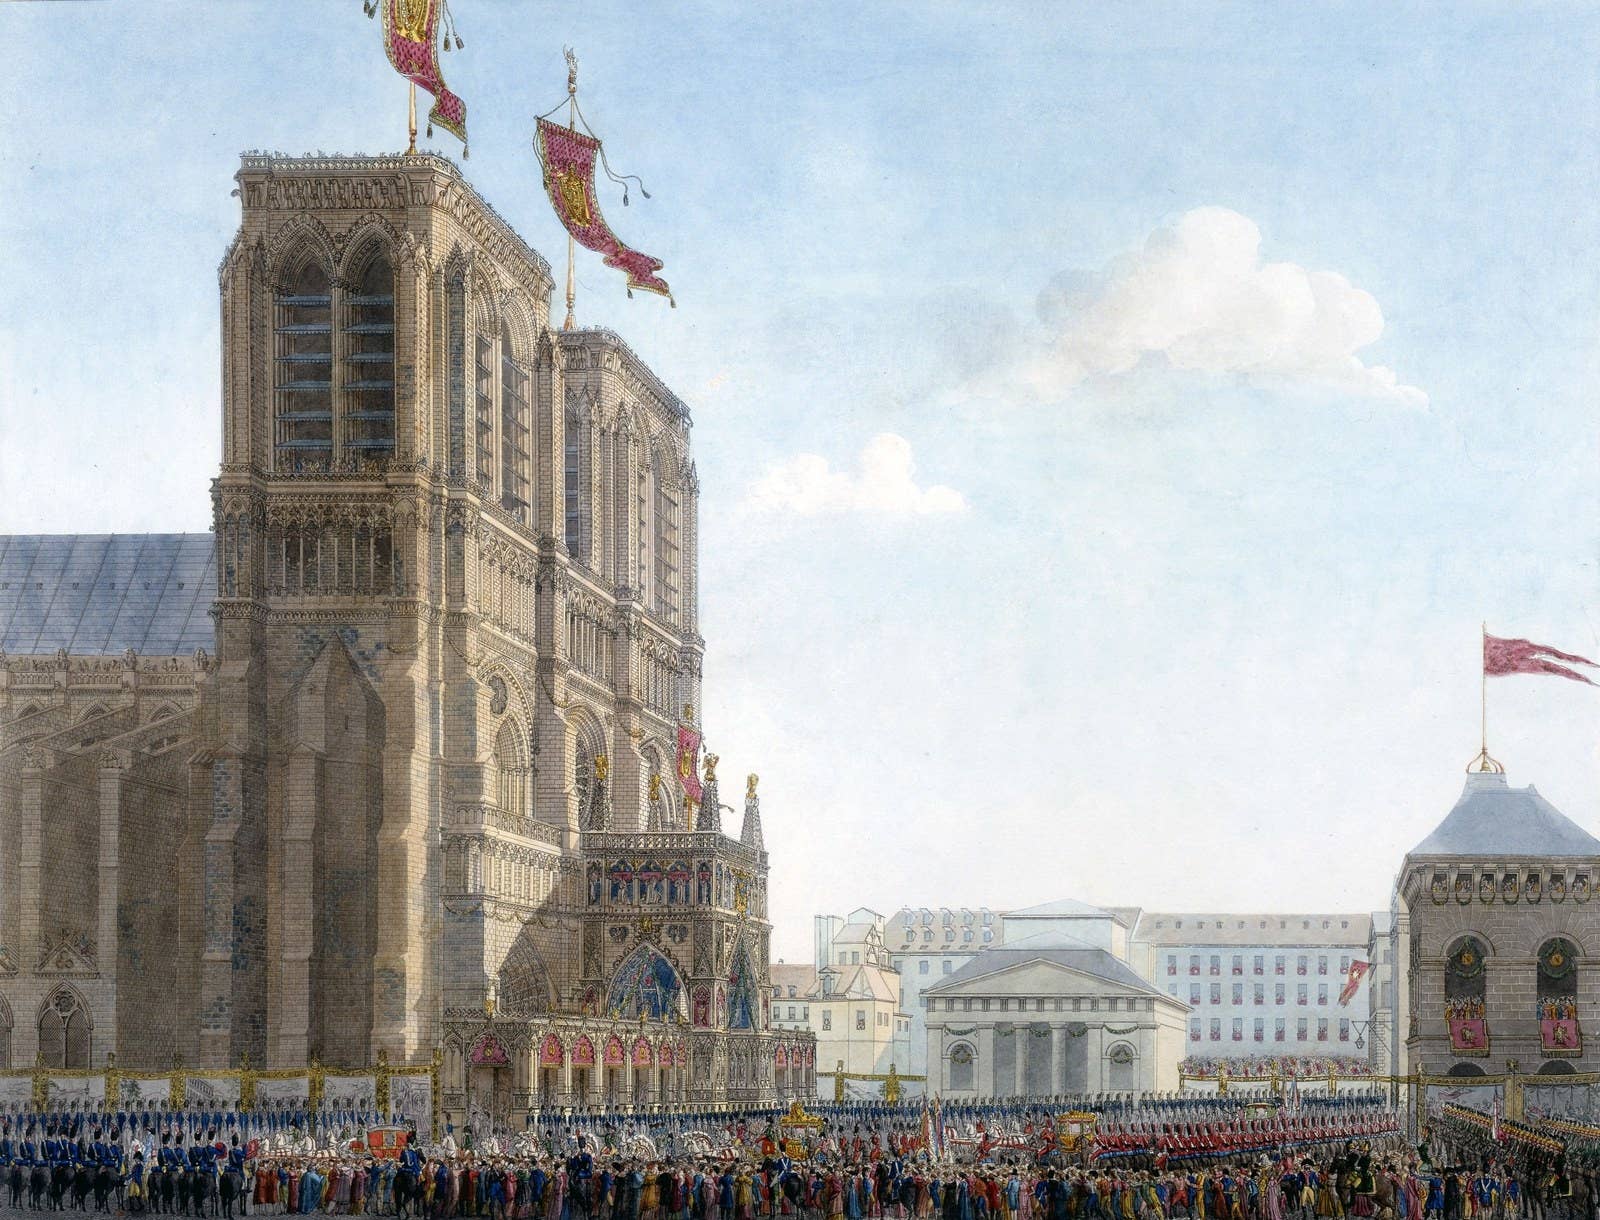 The emperor arriving at Notre-Dame from "Book of the Coronation" by Percier and Fontaine.